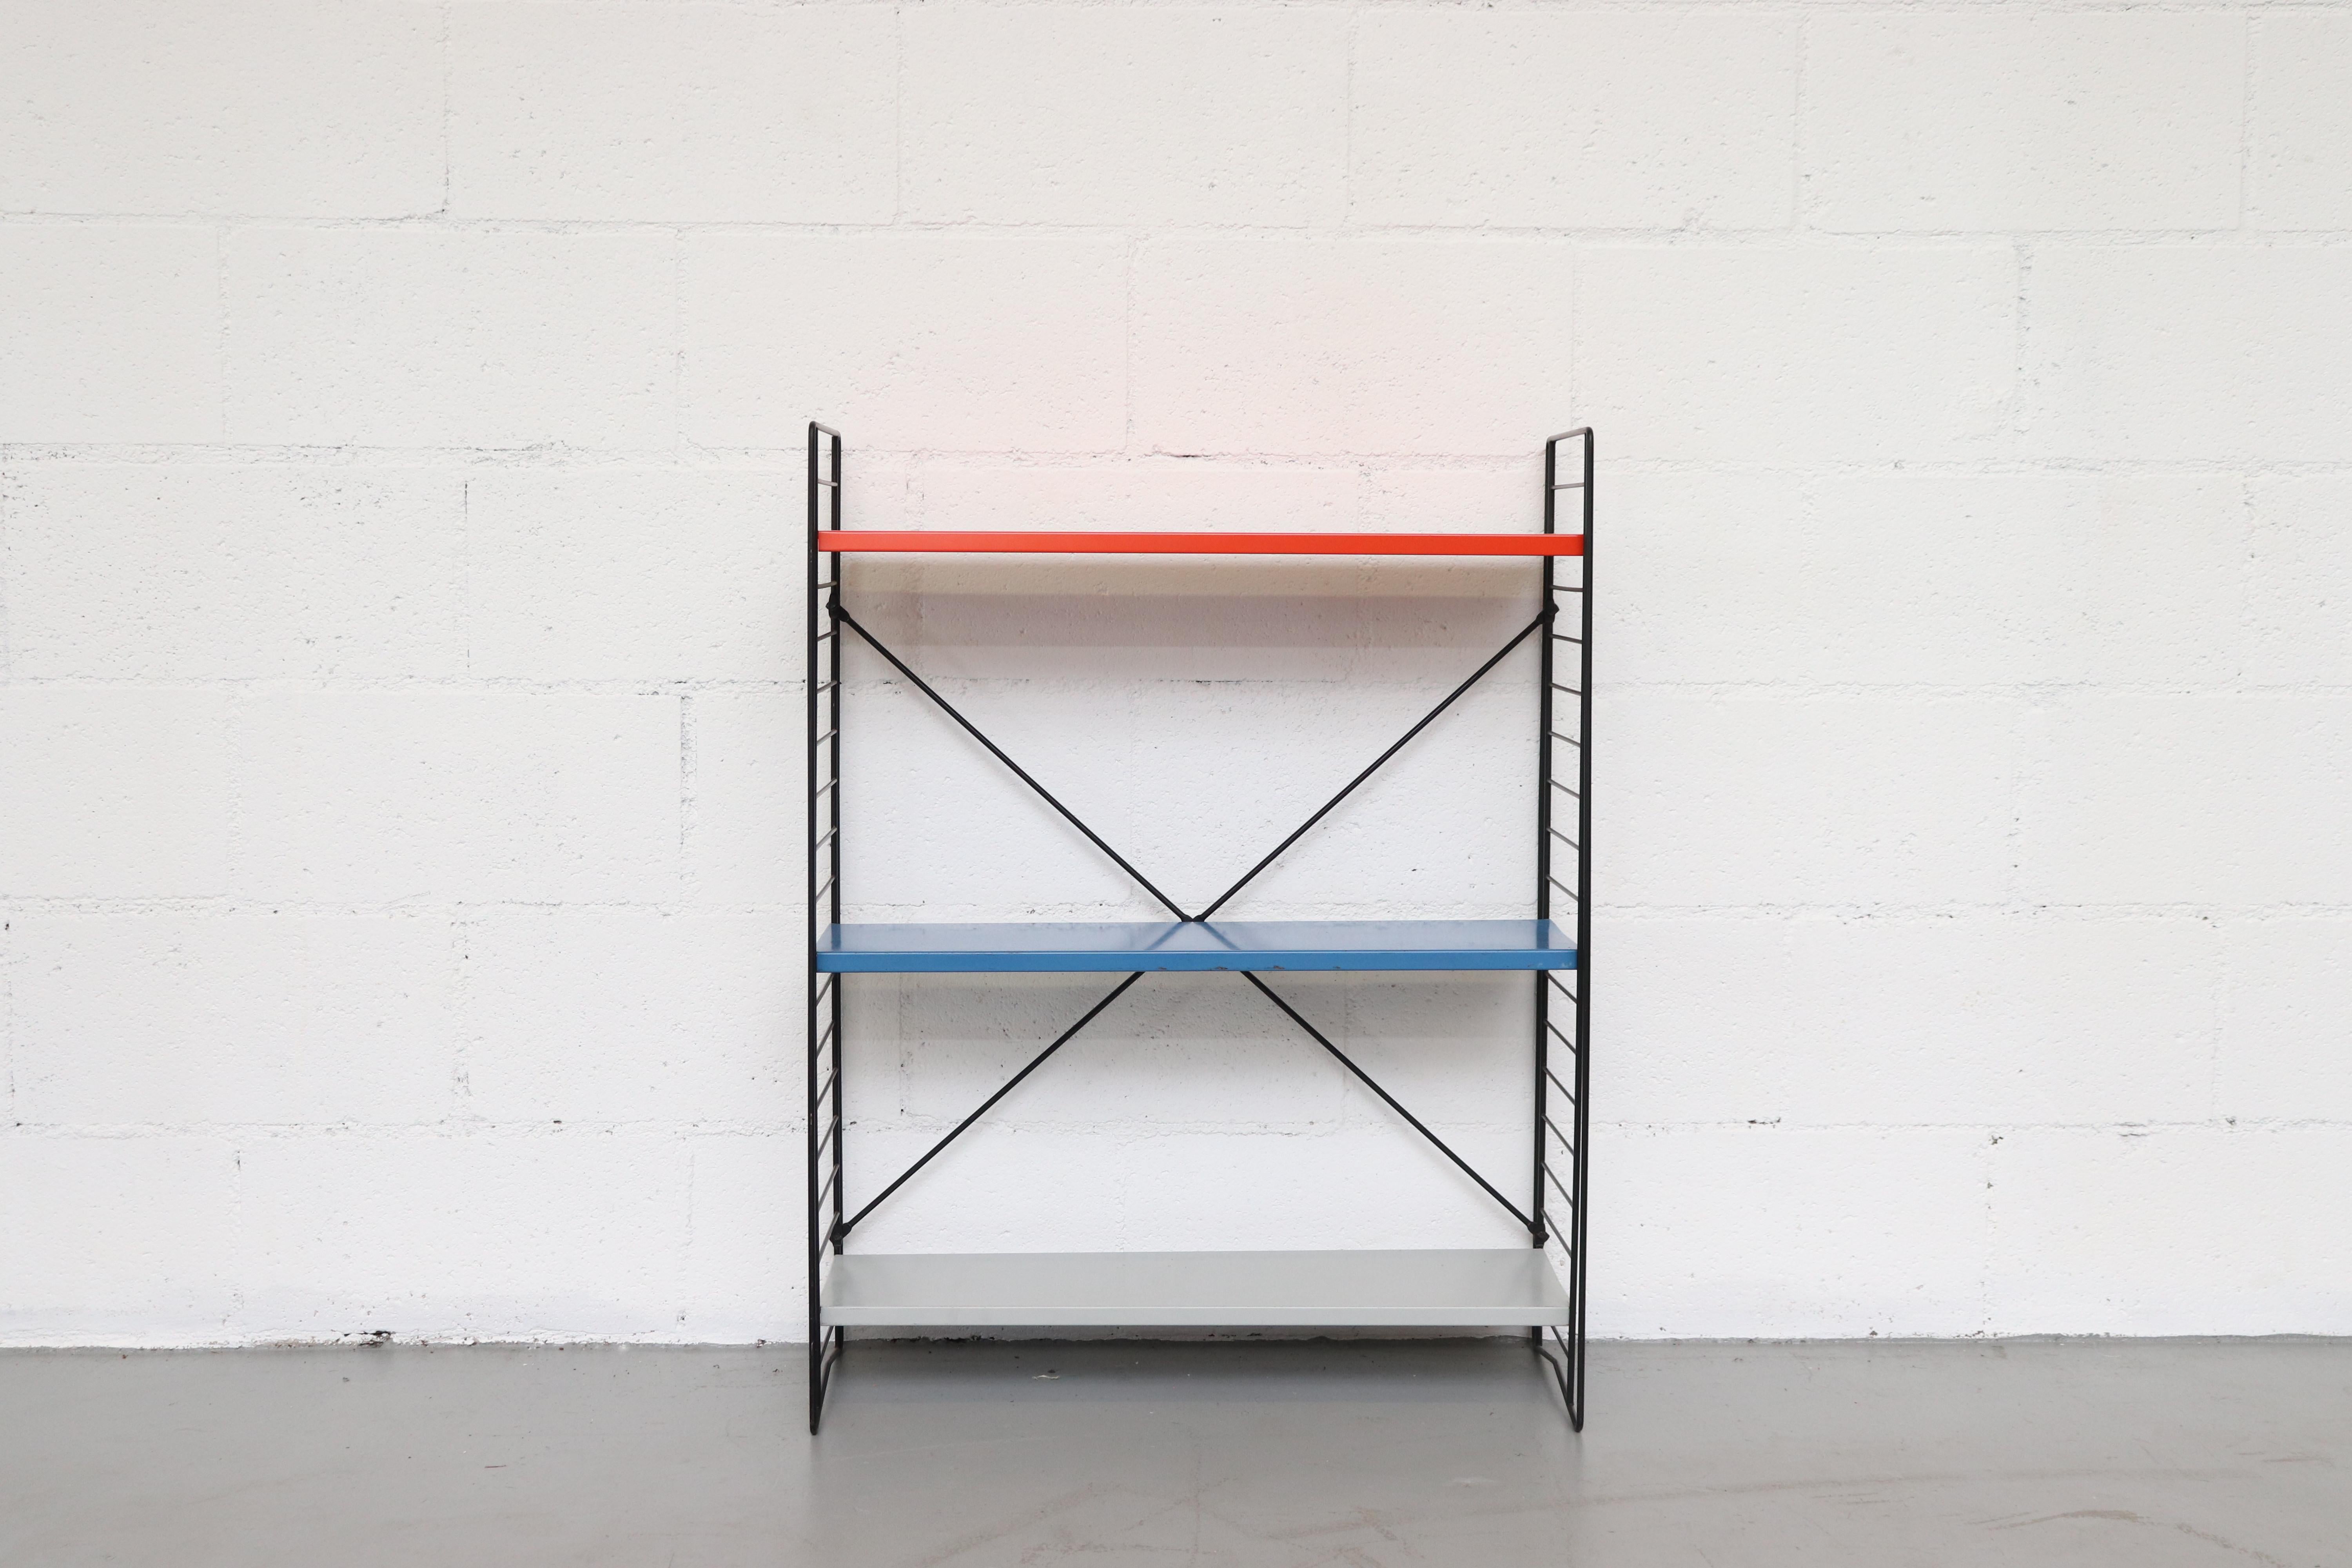 Multicolored orange, blue, grey enameled metal shelves with black wire stands. Shelves are moveable. Other color combinations available, listed separately. Can ship flat.